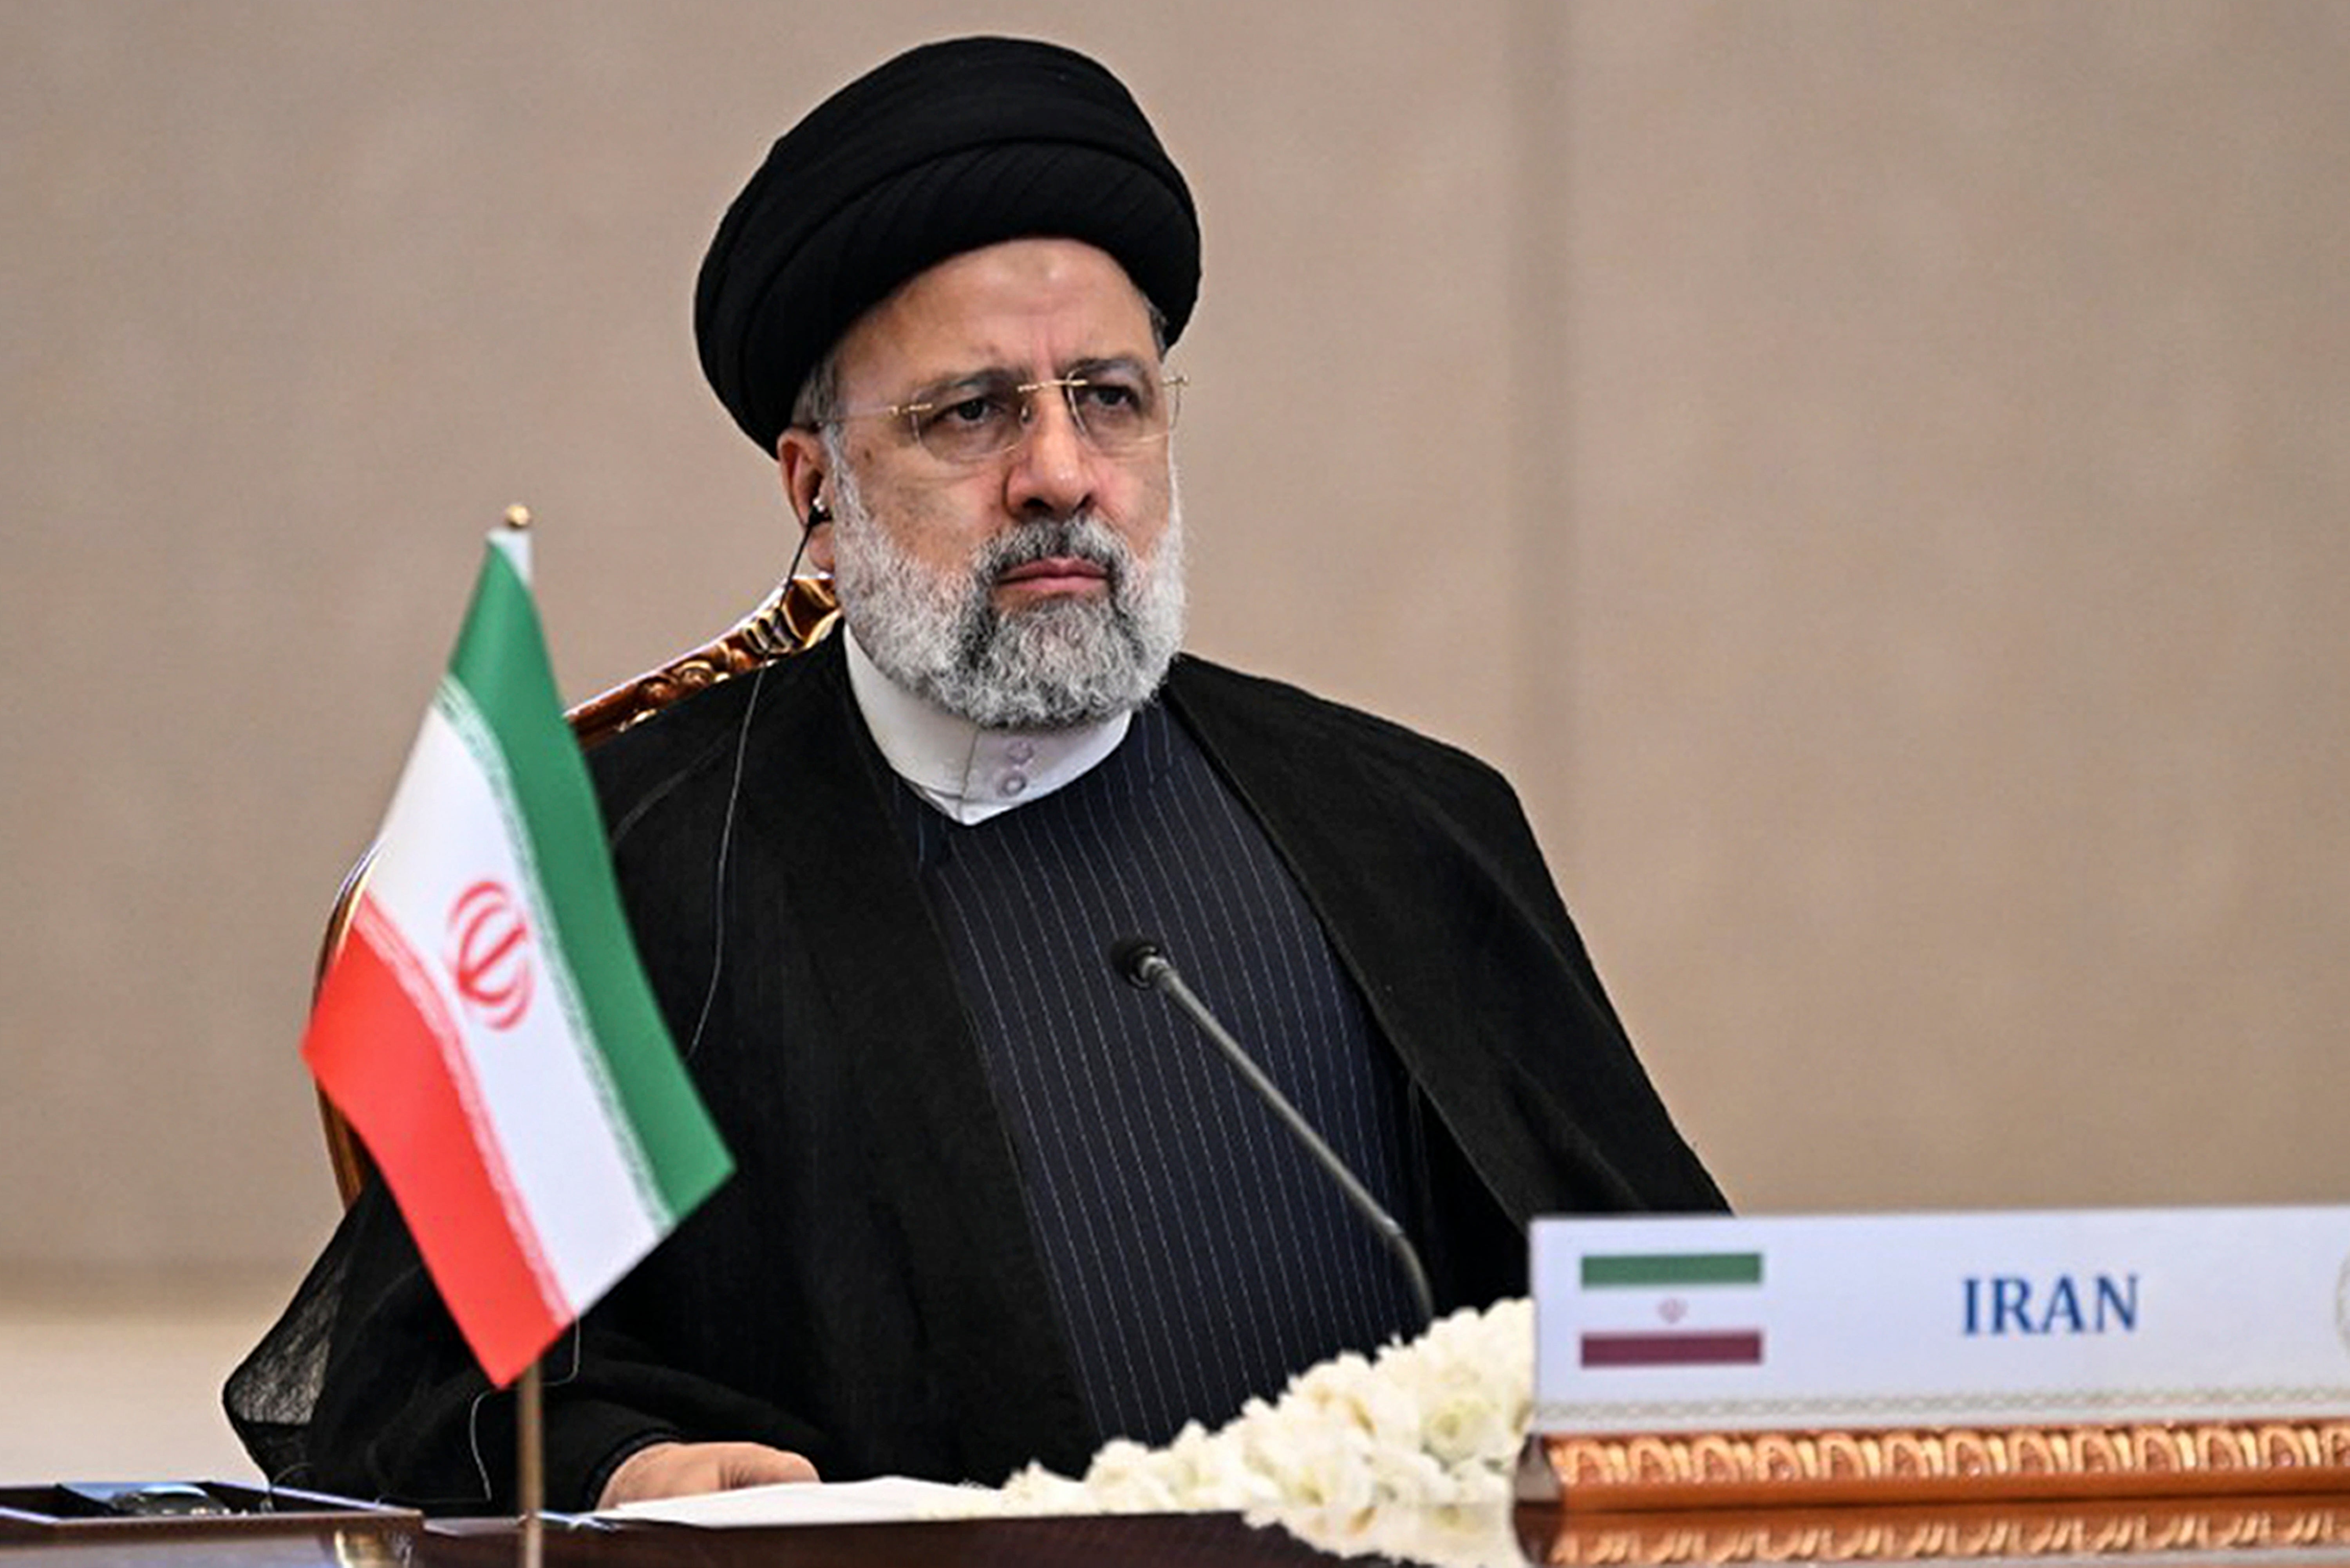 Raisi served on the commissions where international rights groups estimate that as many as 5,000 people were executed